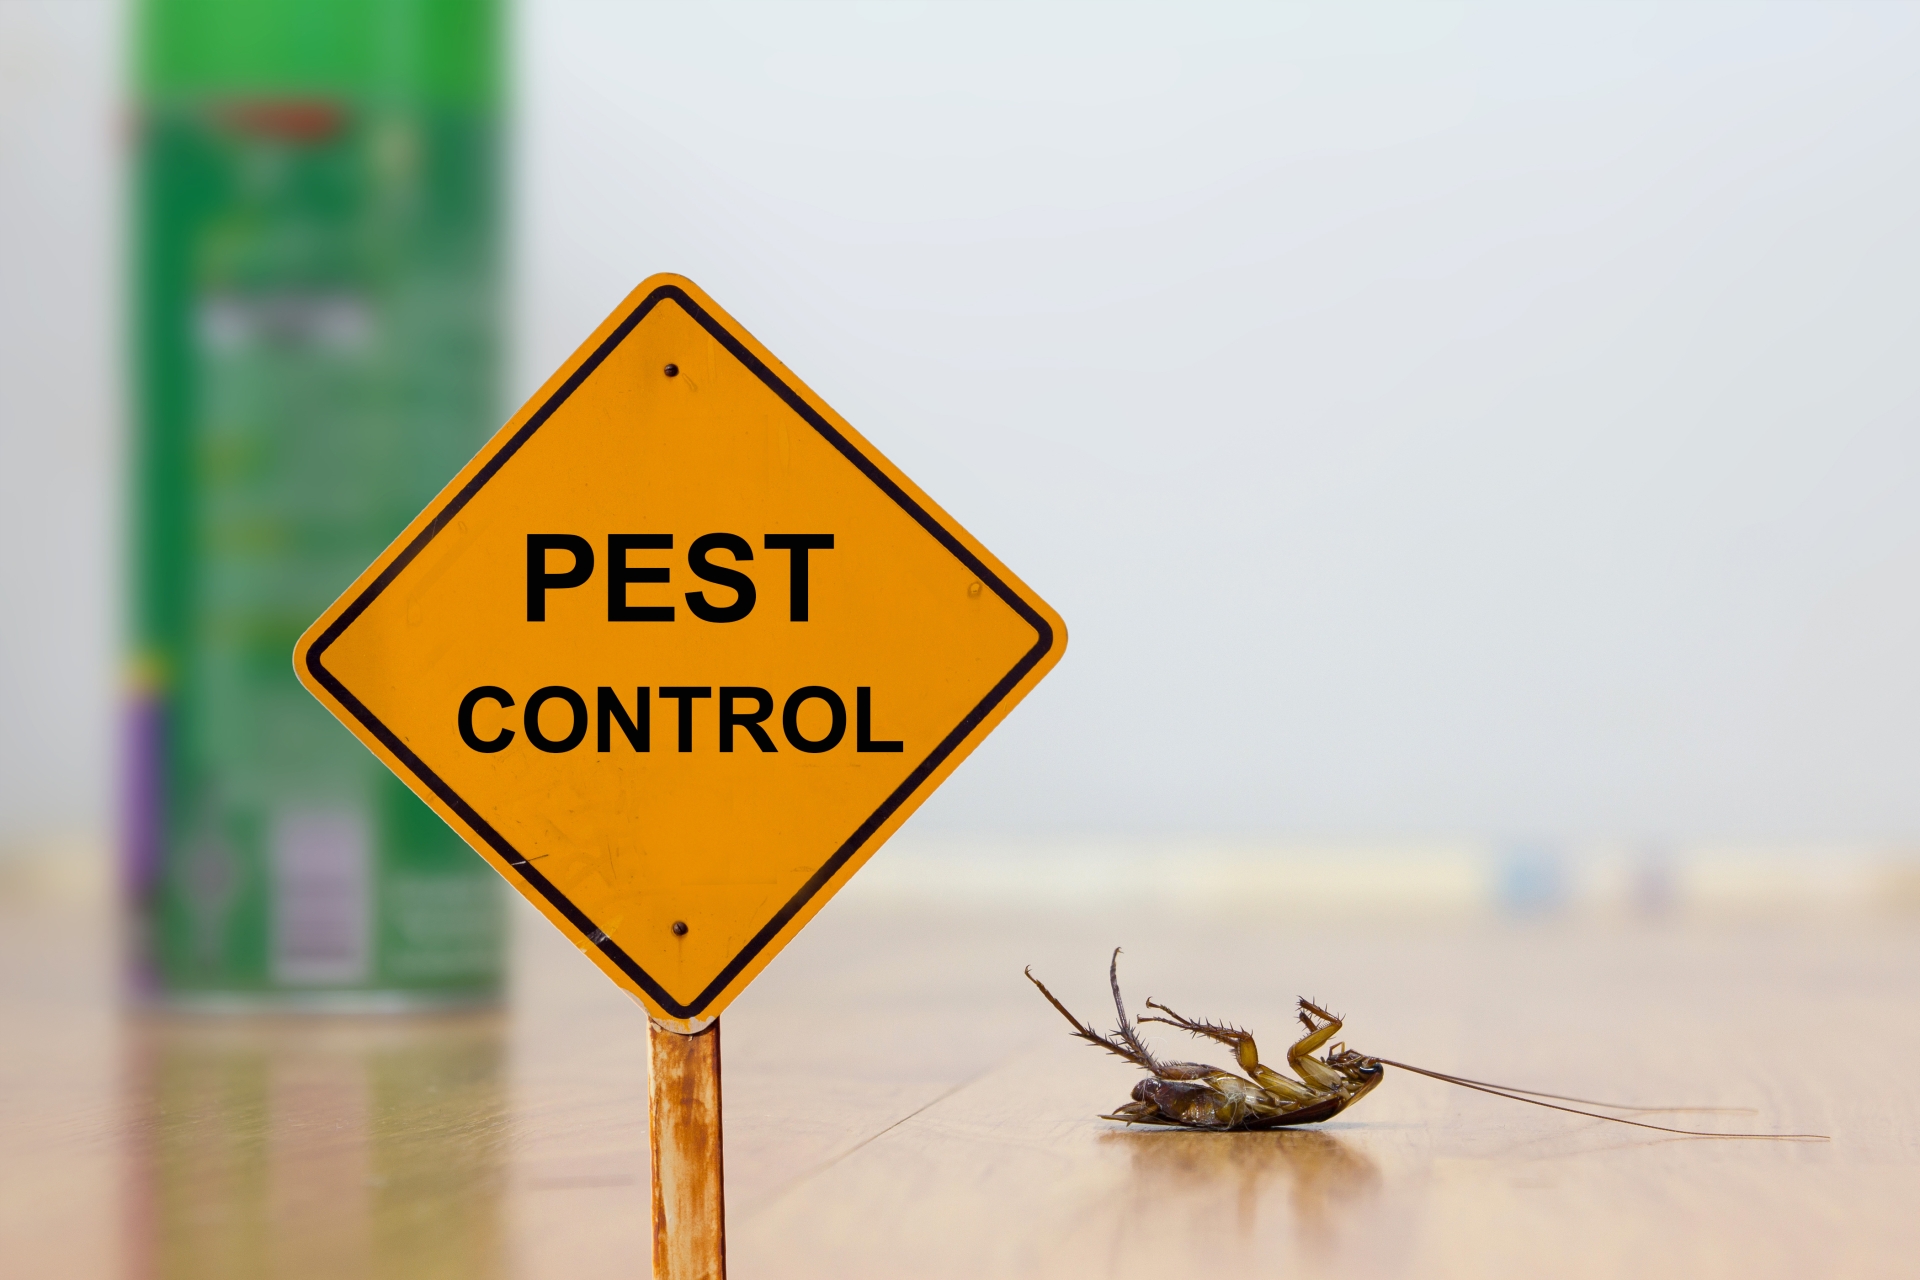 24 Hour Pest Control, Pest Control in West Ealing, W13. Call Now 020 8166 9746